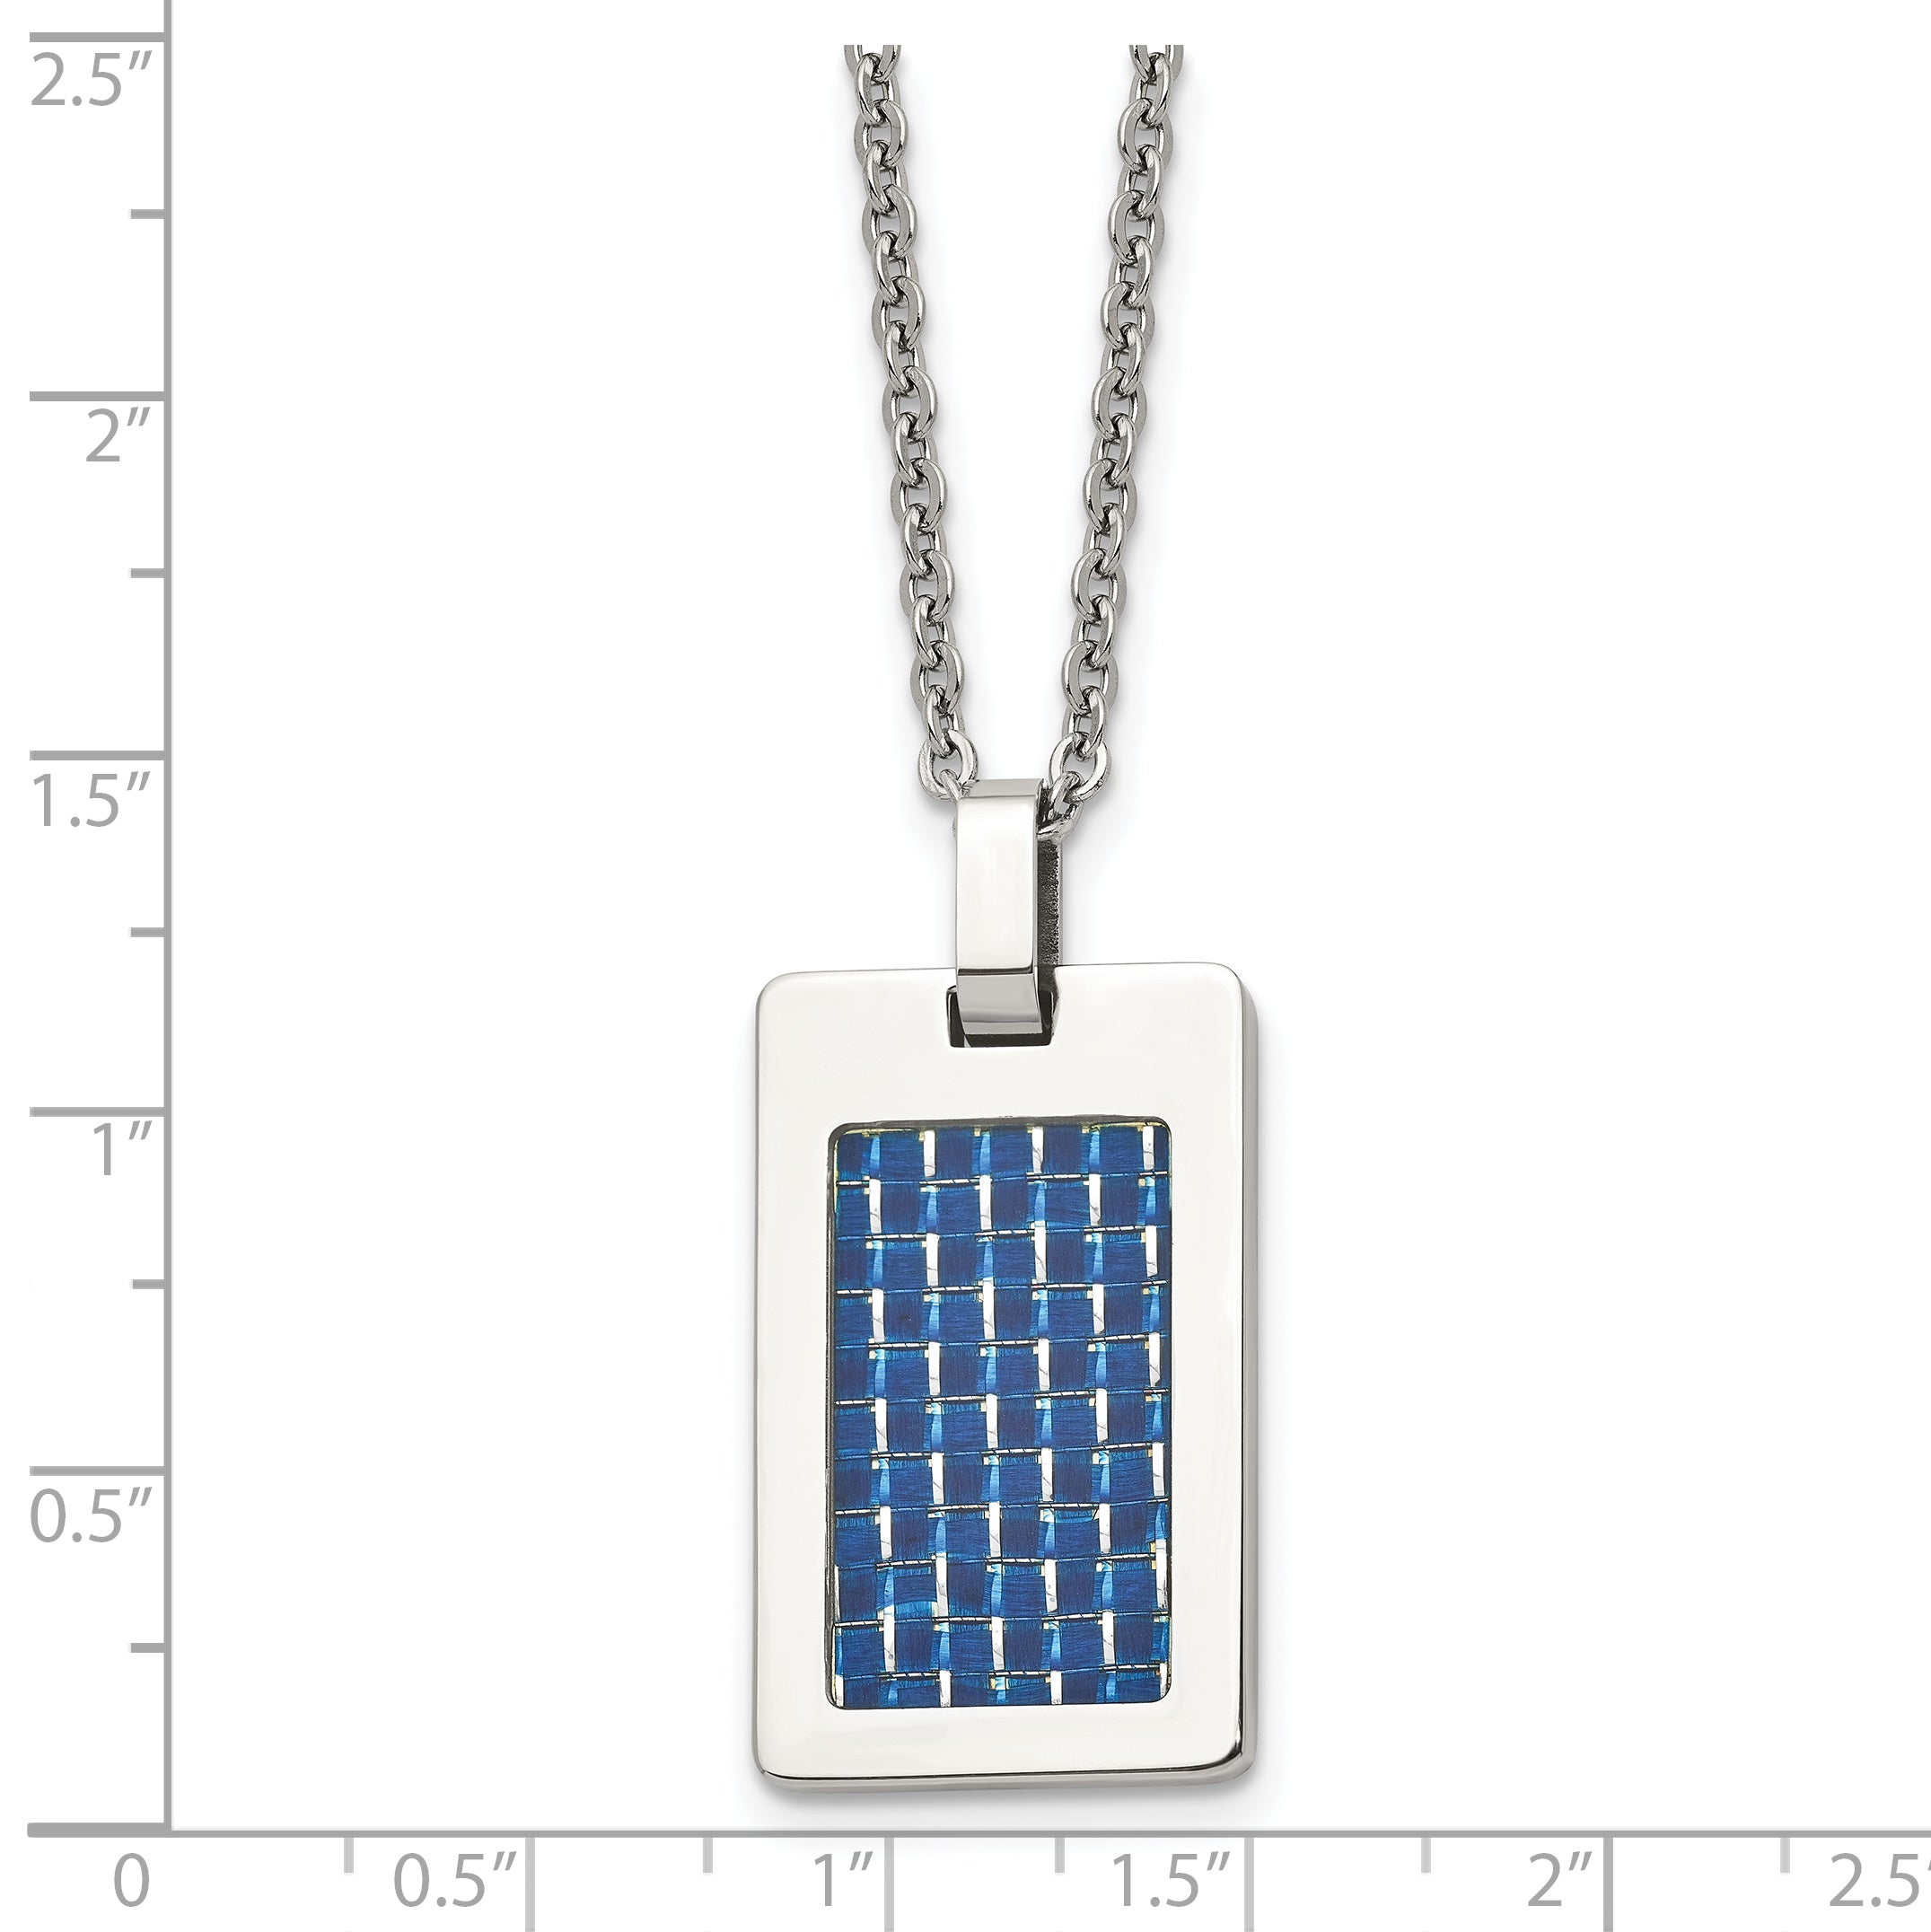 Chisel Stainless Steel Polished with Blue Carbon Fiber Inlay Rectangle Dog Tag on a 22 inch Cable Chain Necklace